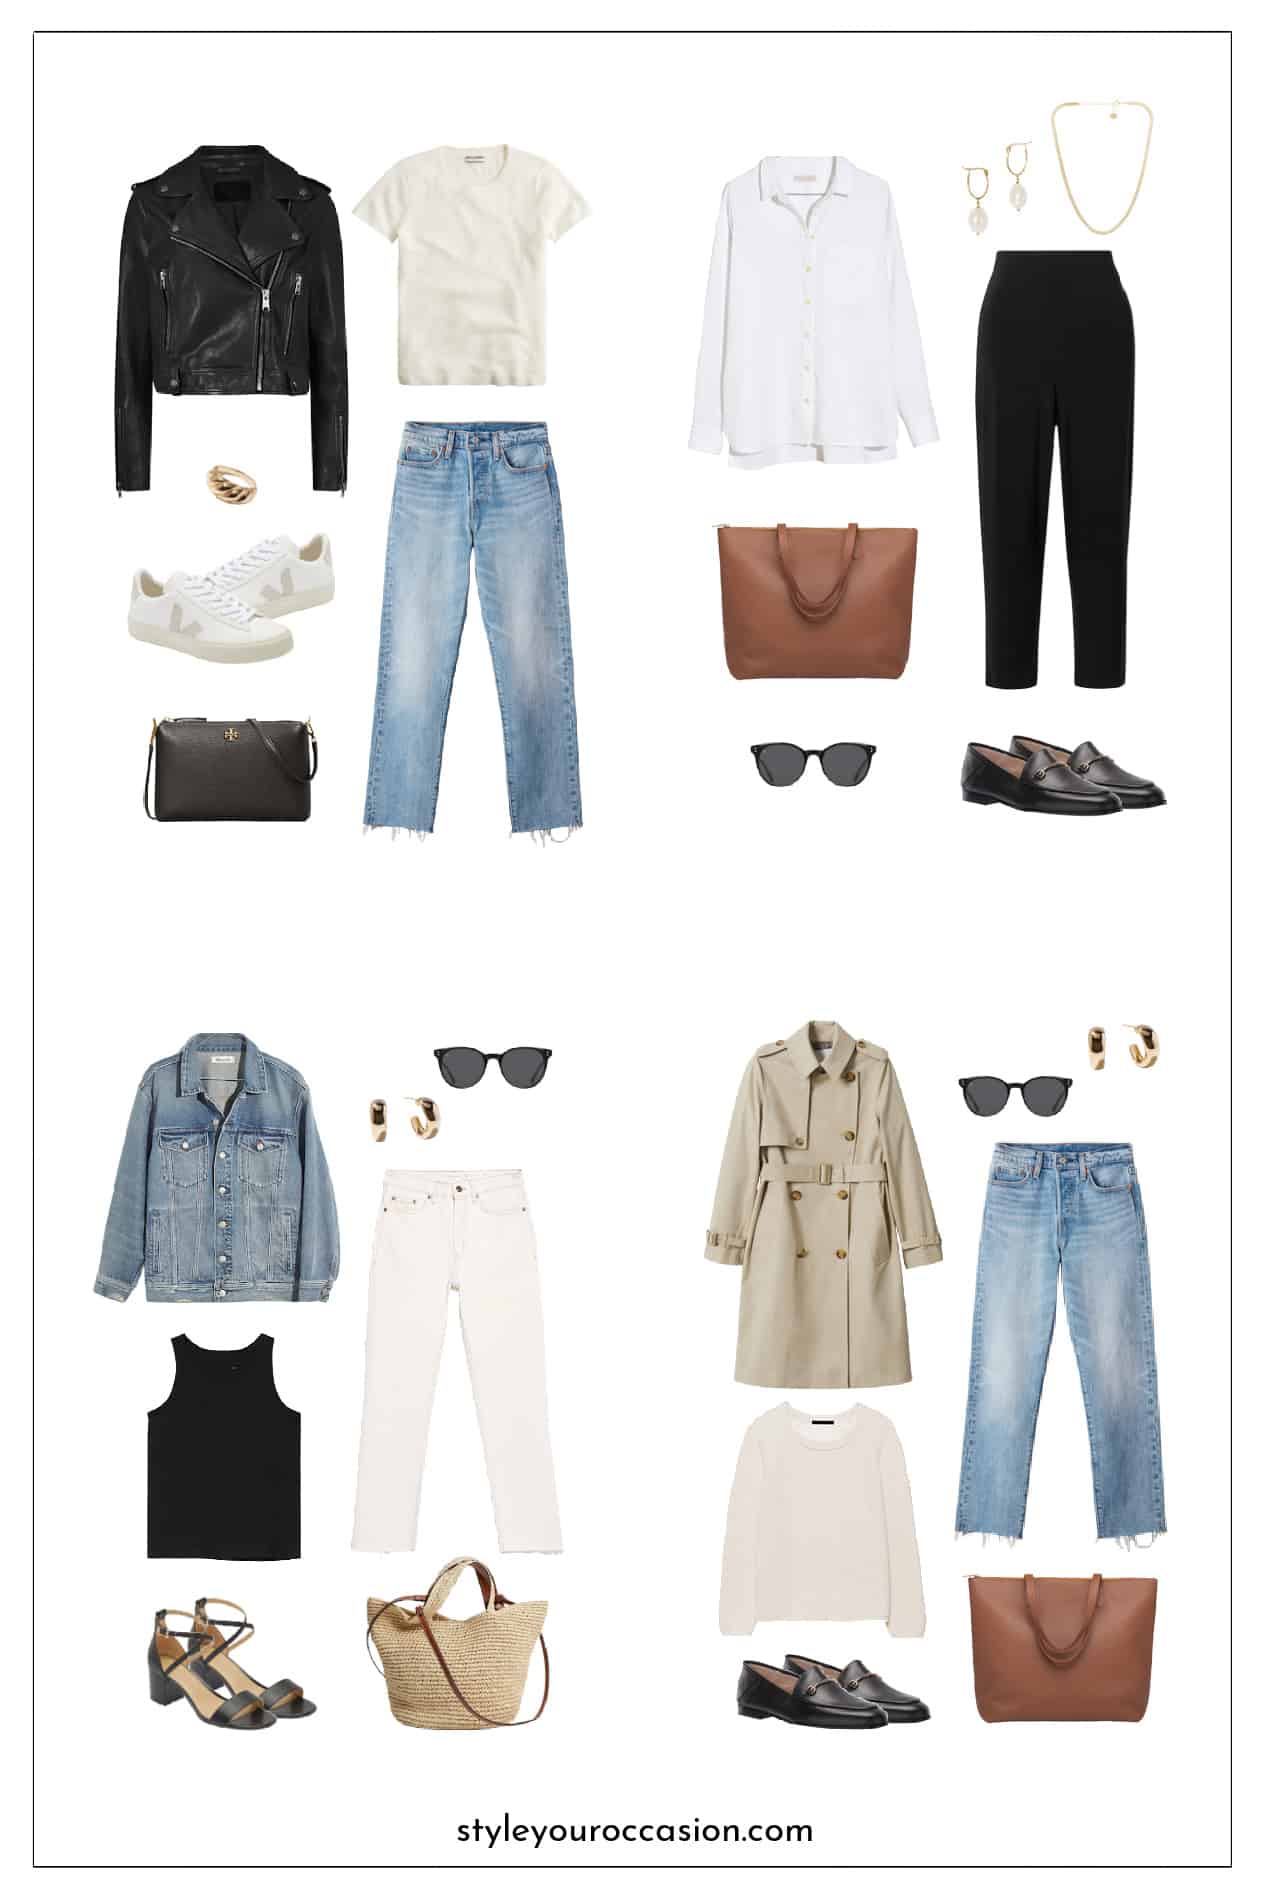 French Minimalist Capsule Wardrobe Spring 2021 Collection - LIFE WITH JAZZ